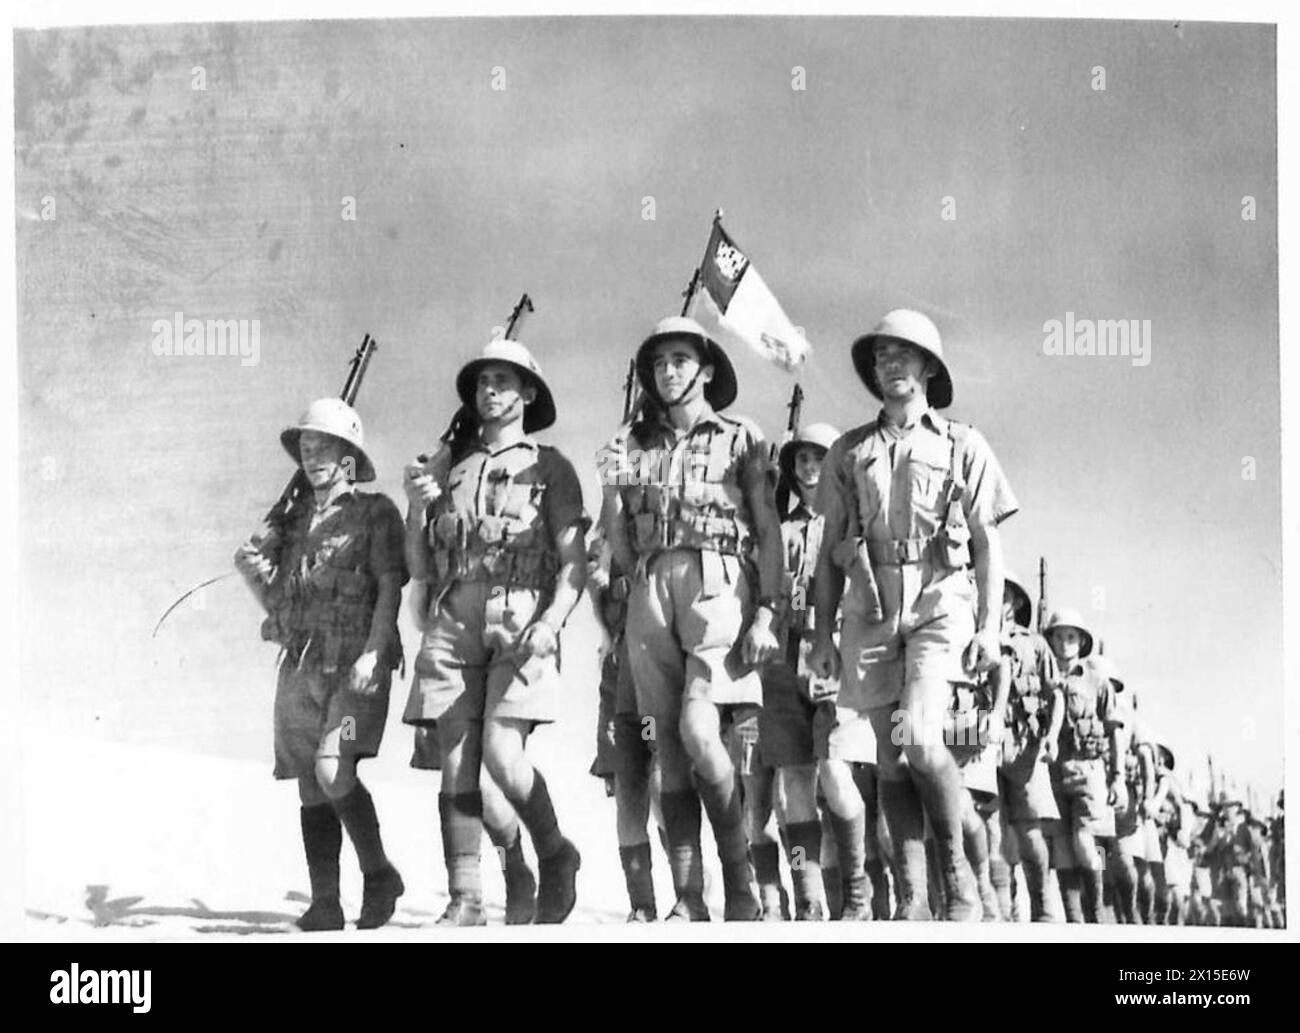 PHOTOGRAPHS TAKEN ON A VISIT TO A UNIT OF THE FREE FRENCH FORCES - An infantry unit on the march. Note Ensign British Army Stock Photo